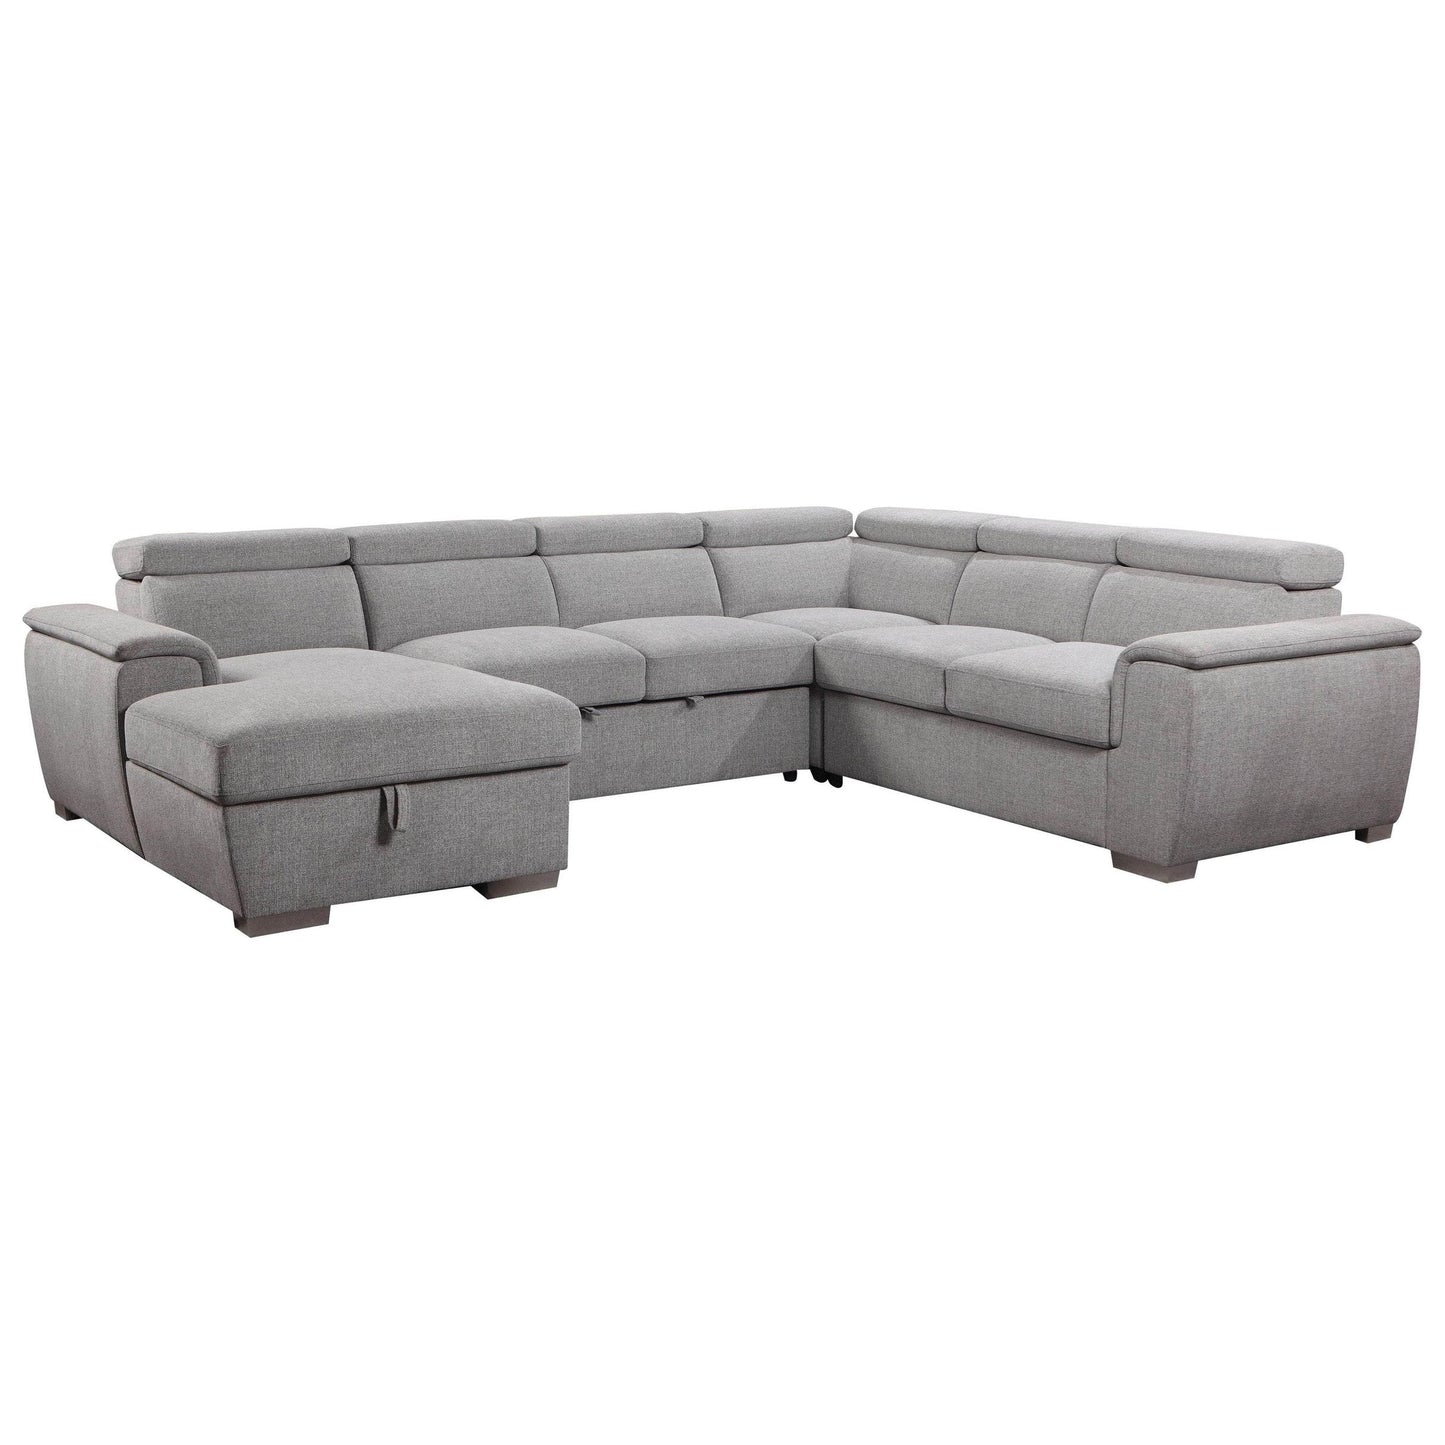 MARCO - SLEEPER SECTIONAL - GRAY FABRIC - CLEARANCE